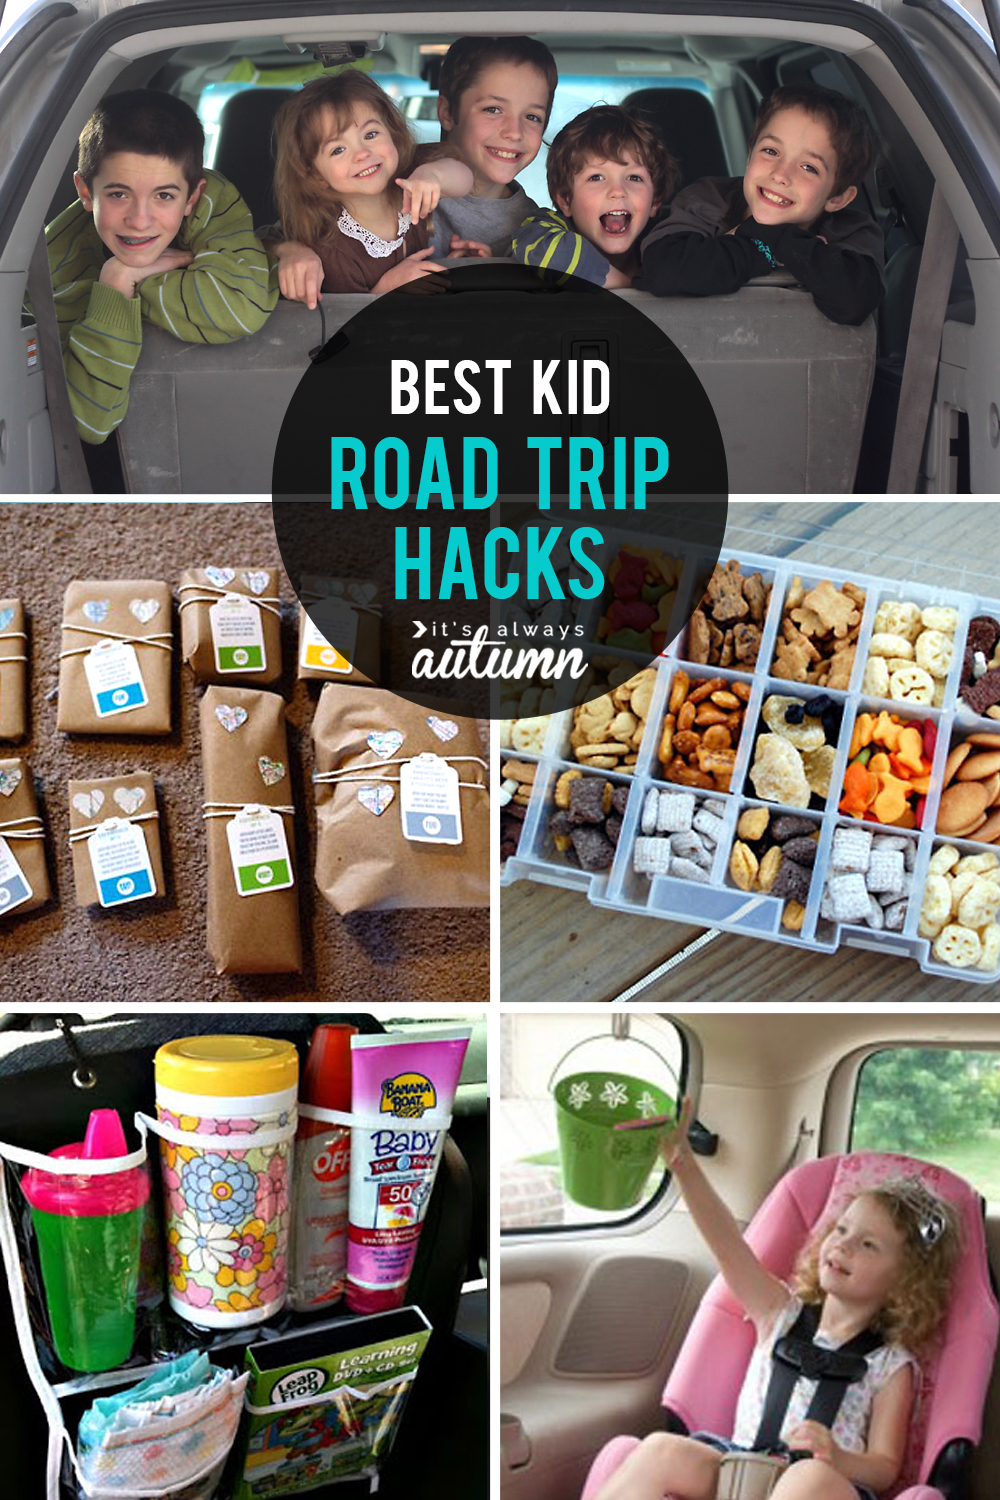 Travel Play Ideas for Kids - The Car Journey - Busy Busy Learning